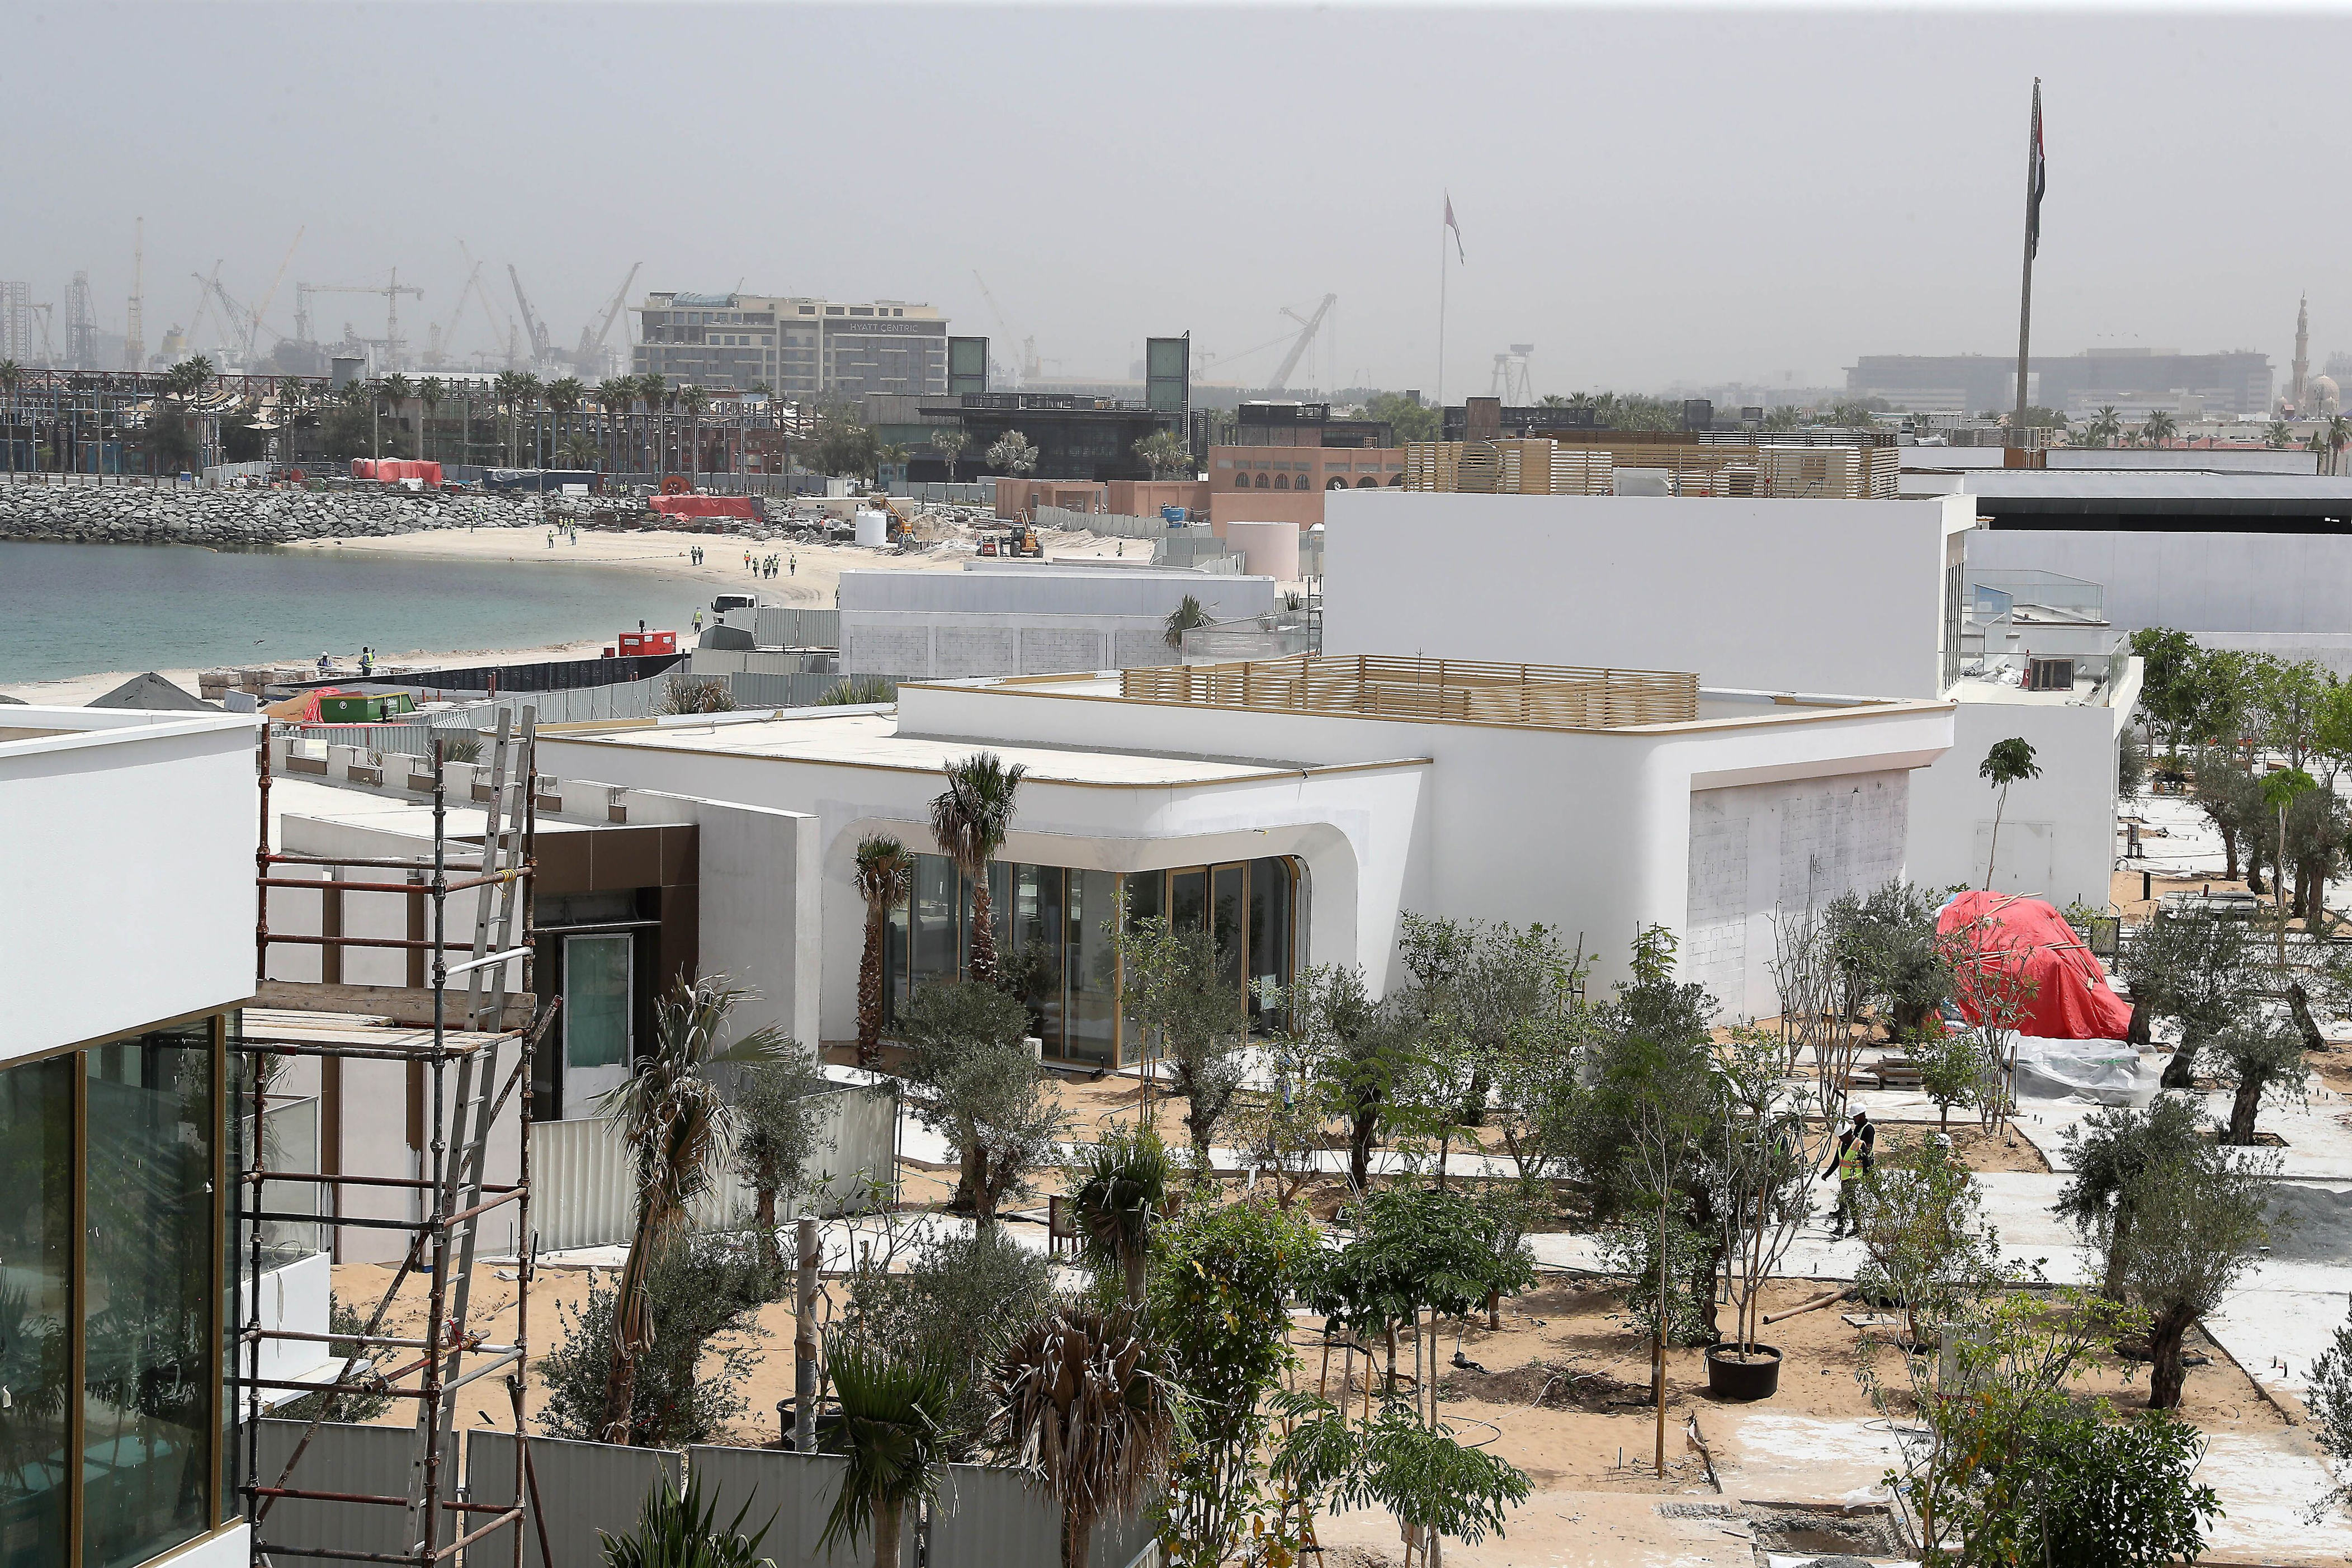 j1 beach: what to expect from the new la mer venue when it opens in september